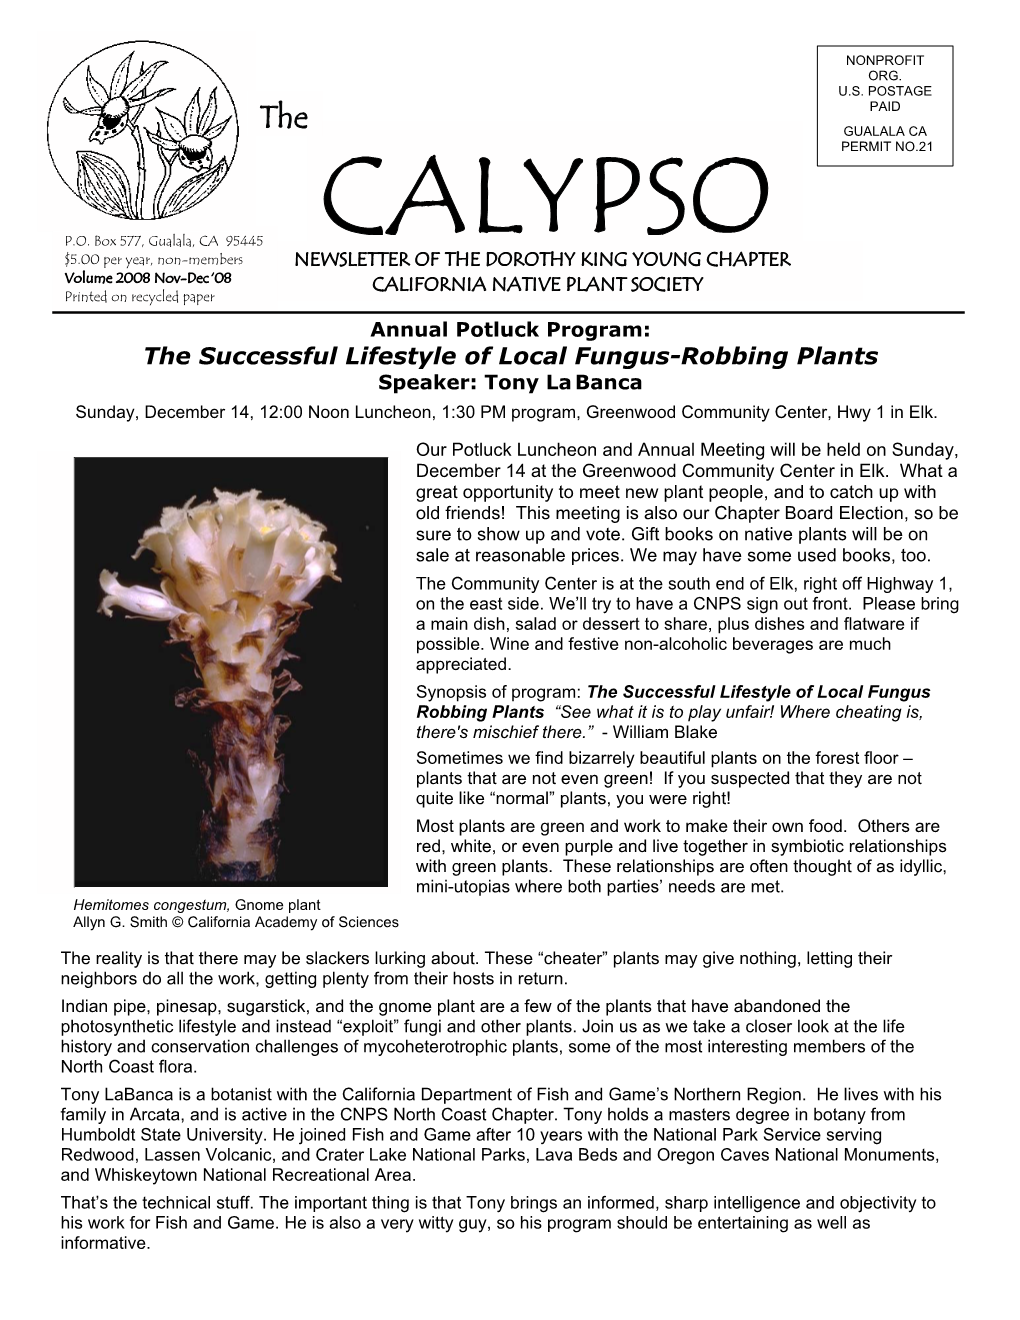 CALYPSO $5.00 Per Year, Non-Members NEWSLETTER of the DOROTHY KING YOUNG CHAPTER Volume 2008 Nov-Dec ‘08 CALIFORNIA NATIVE PLANT SOCIETY